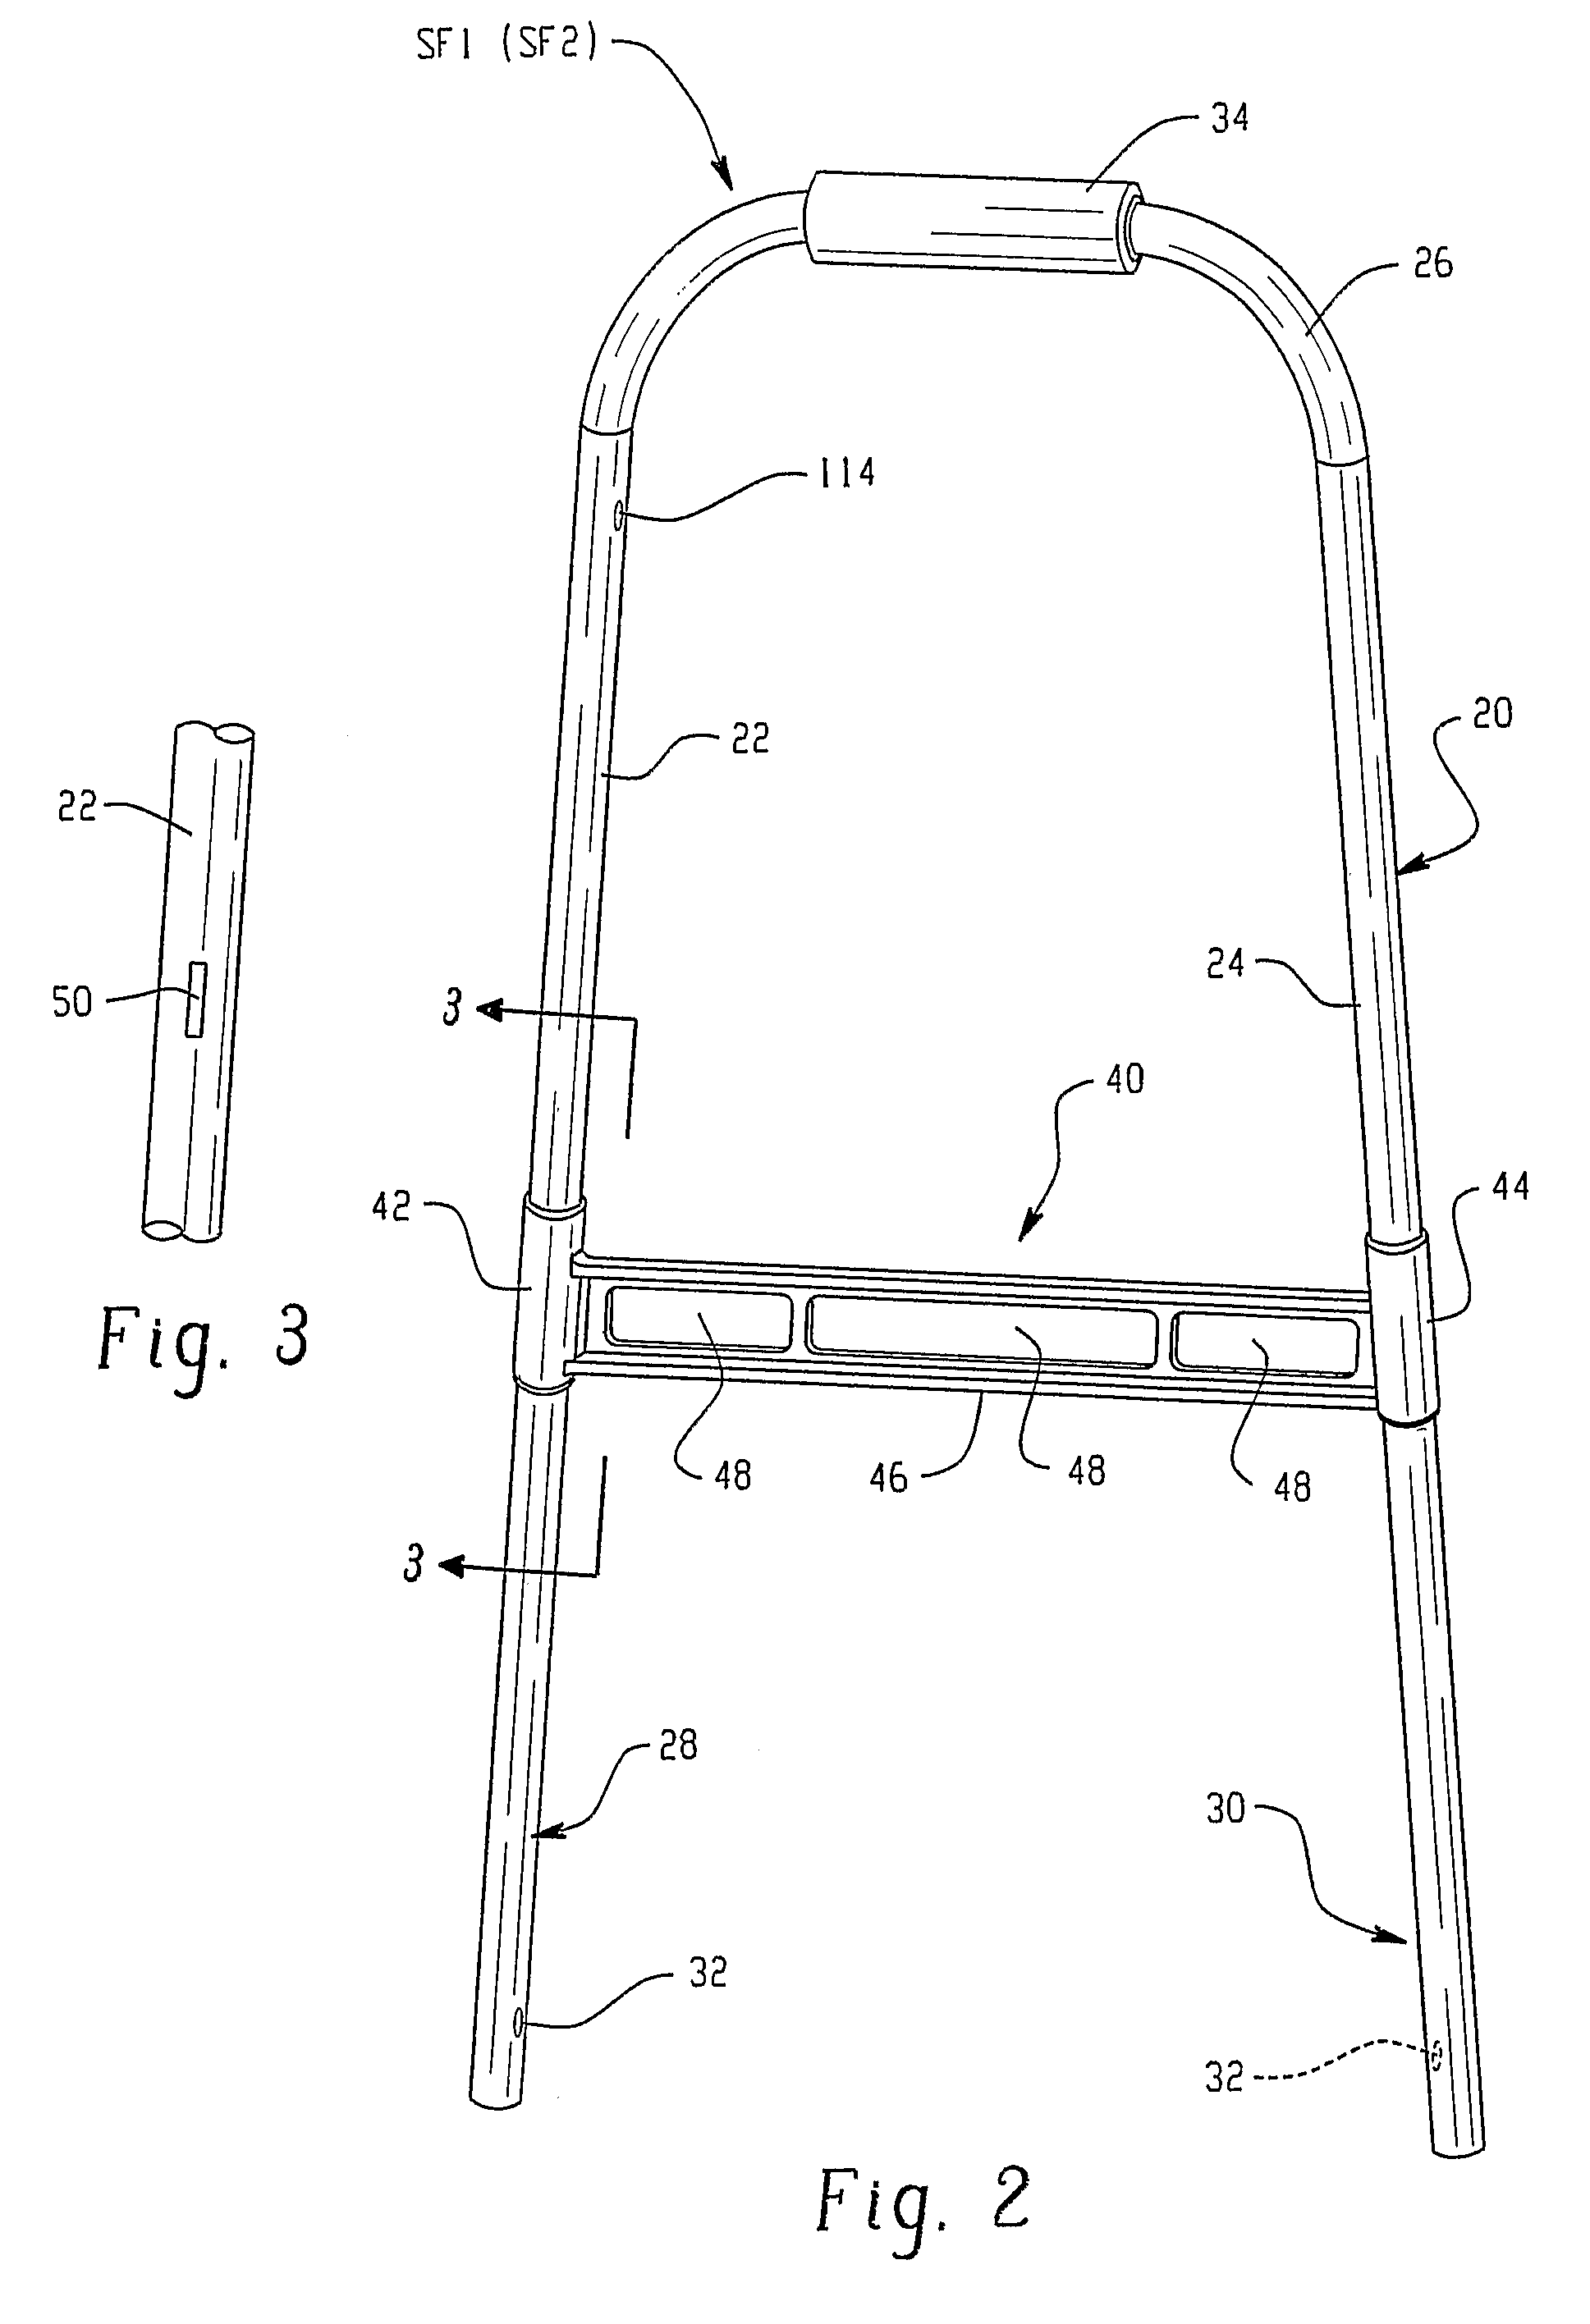 Foldable durable product, such as a patient aid device or walker, and method of forming same